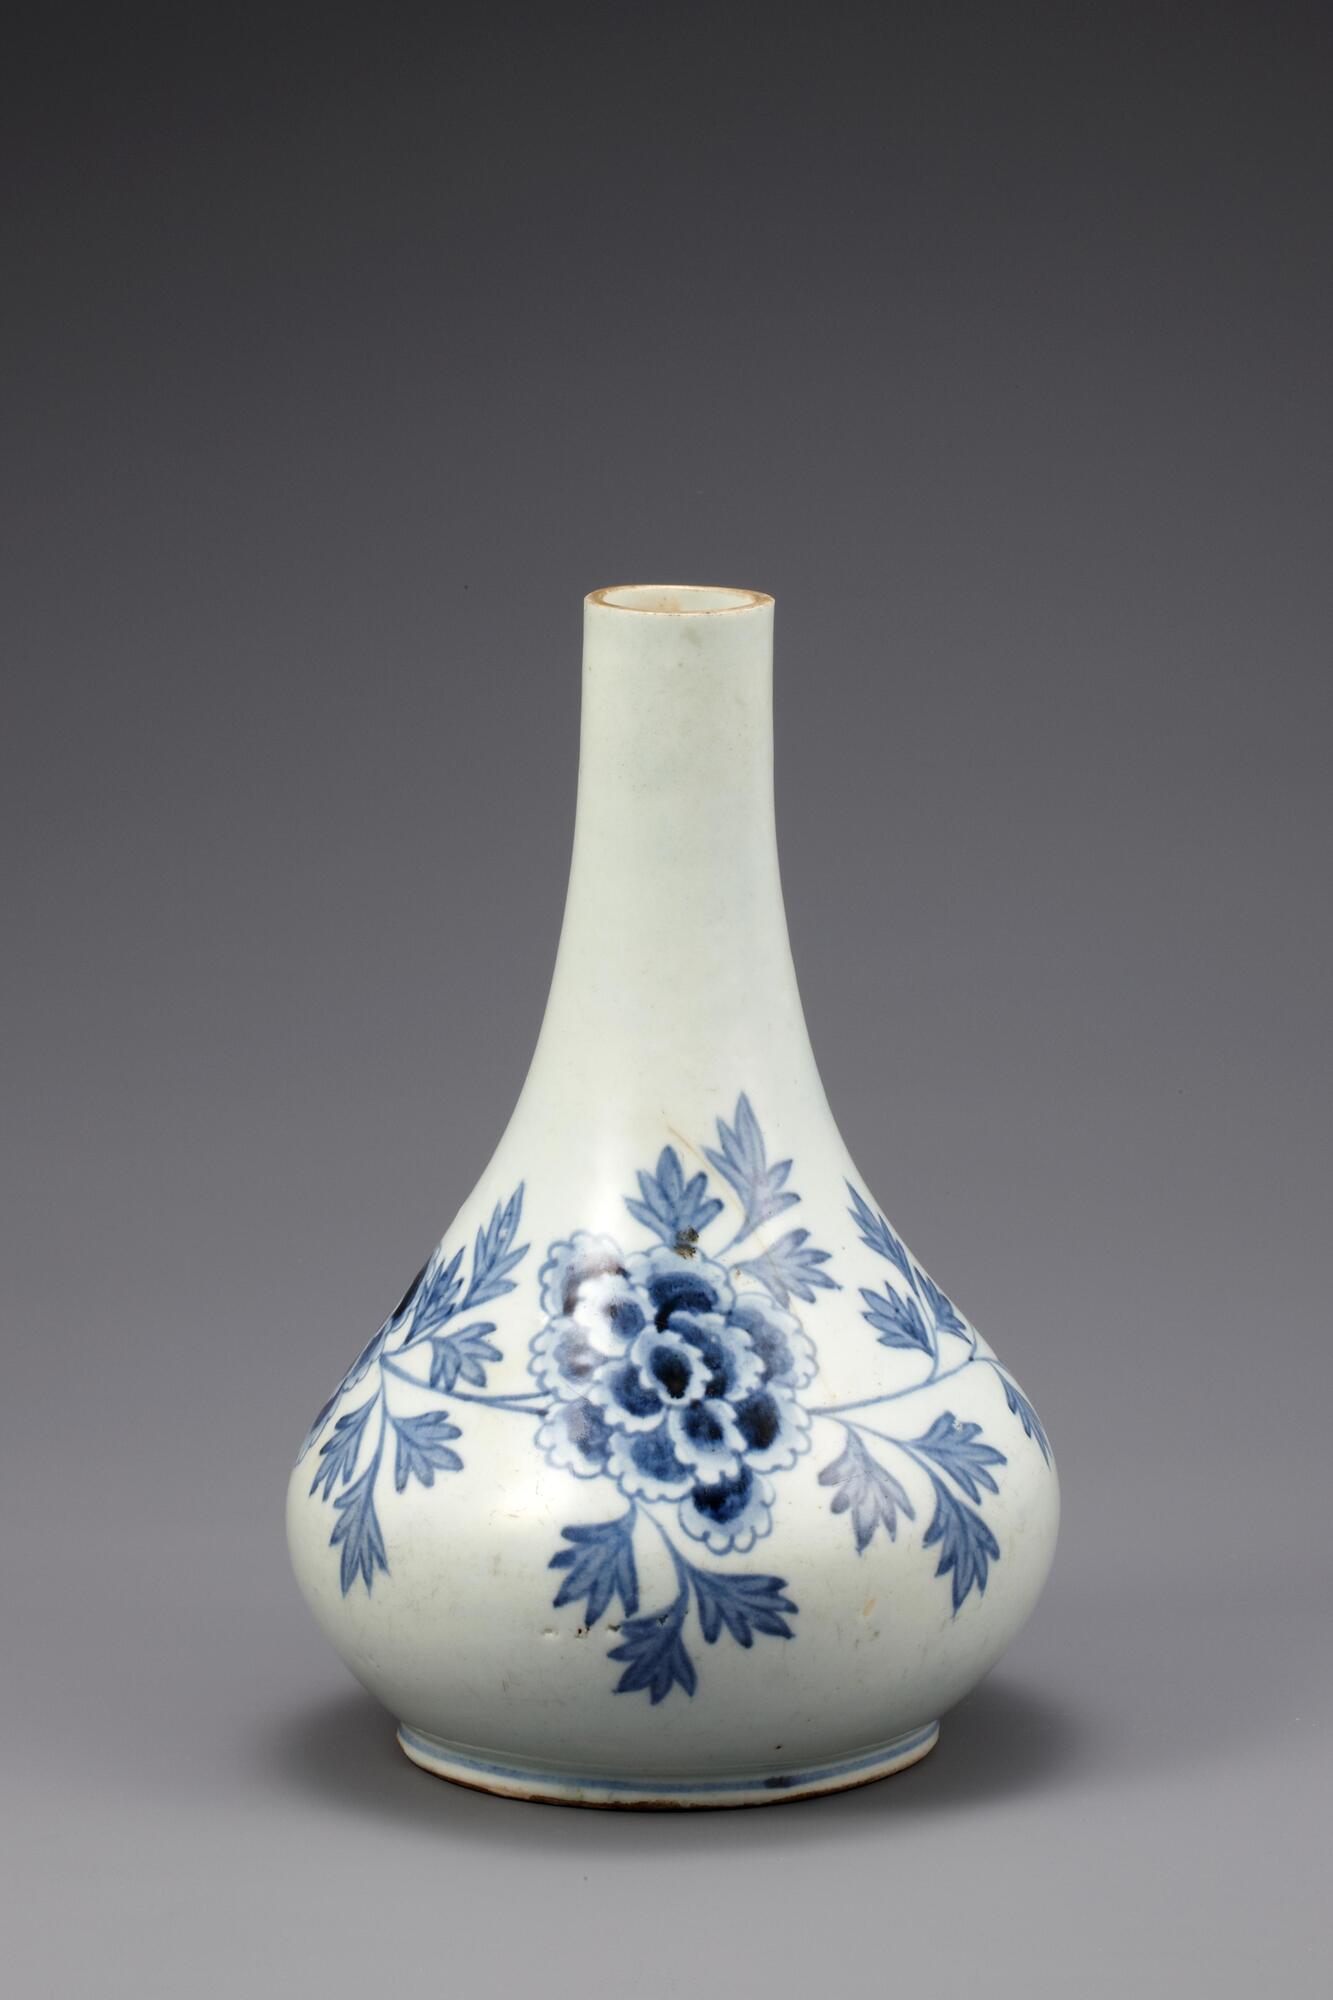 It has a long, thin neck and flat oval body. The wide foot is rather shallow but deeply recessed on the underside. The entire of surface is decorated with peony blossom design printed in cobalt blue sigment.<br />
<br />
This is a long-necked white porcelain bottle with peony sprays wrapping around the entire body. The white porcelain background is bright in colour, while the light and dark contrasts of the peony pattern give its flowers a three-dimensional appearance. There are sand spur marks on the foot, and on the outer base are incised symbols. Such marks are found in the waste deposits of kilns in Bunwonri, Gwangju-gun, Gyeonggi-do at the end of the 19th century. The mouth has been severed lost. This is a high-quality white porcelain bottle, with well sintered clay and glaze, but the rim has been severed and lost.<br />
[Korean Collection, University of Michigan Museum of Art (2014) p.179]